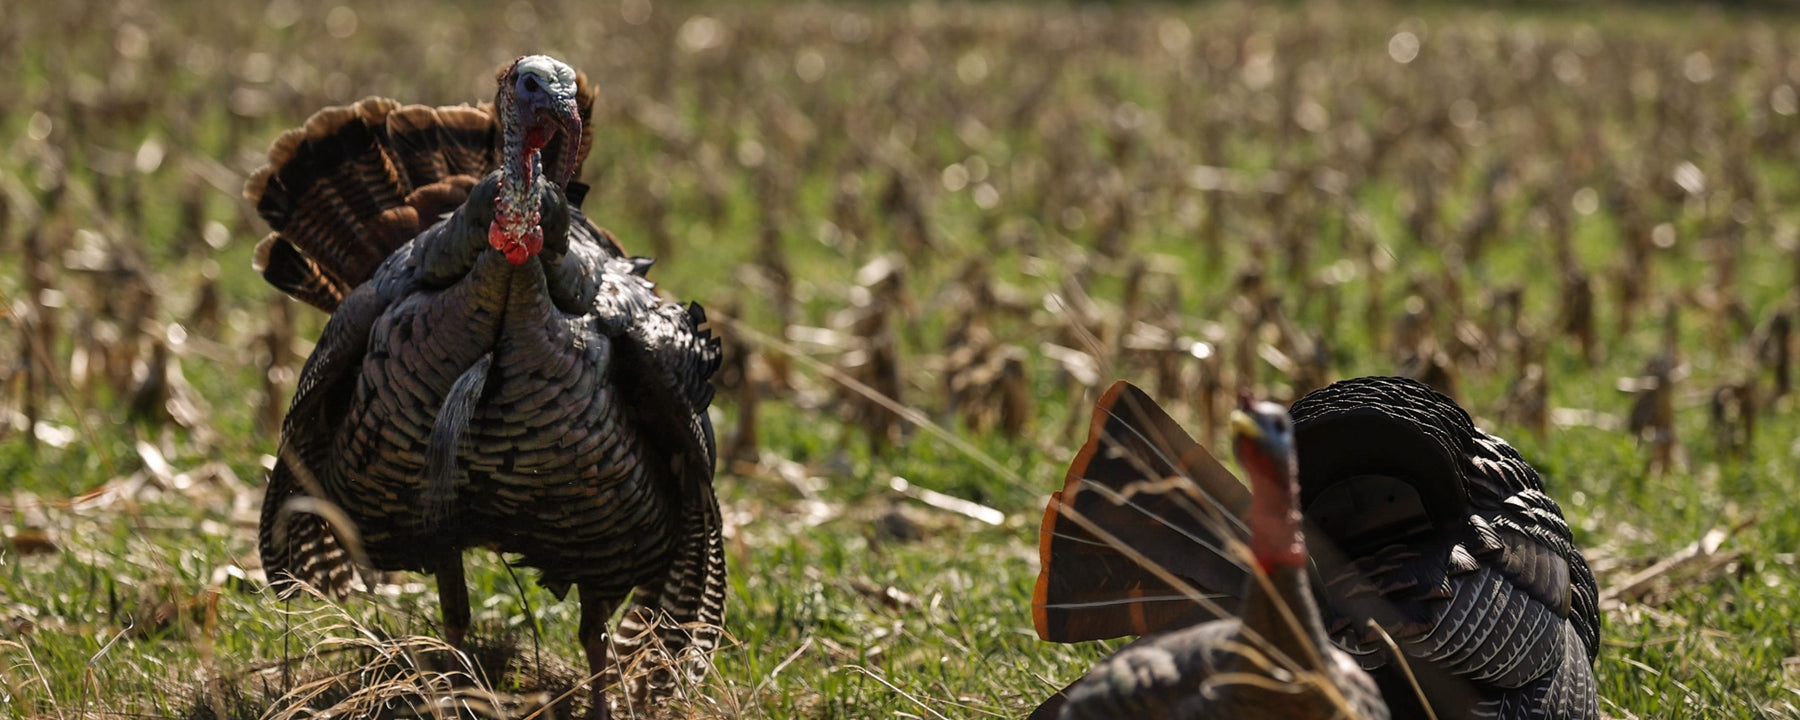 Chasse au dindon sauvage : Quoi faire avant, pendant et après la chasse||Wild turkey hunting : What to do before, during and after hunting